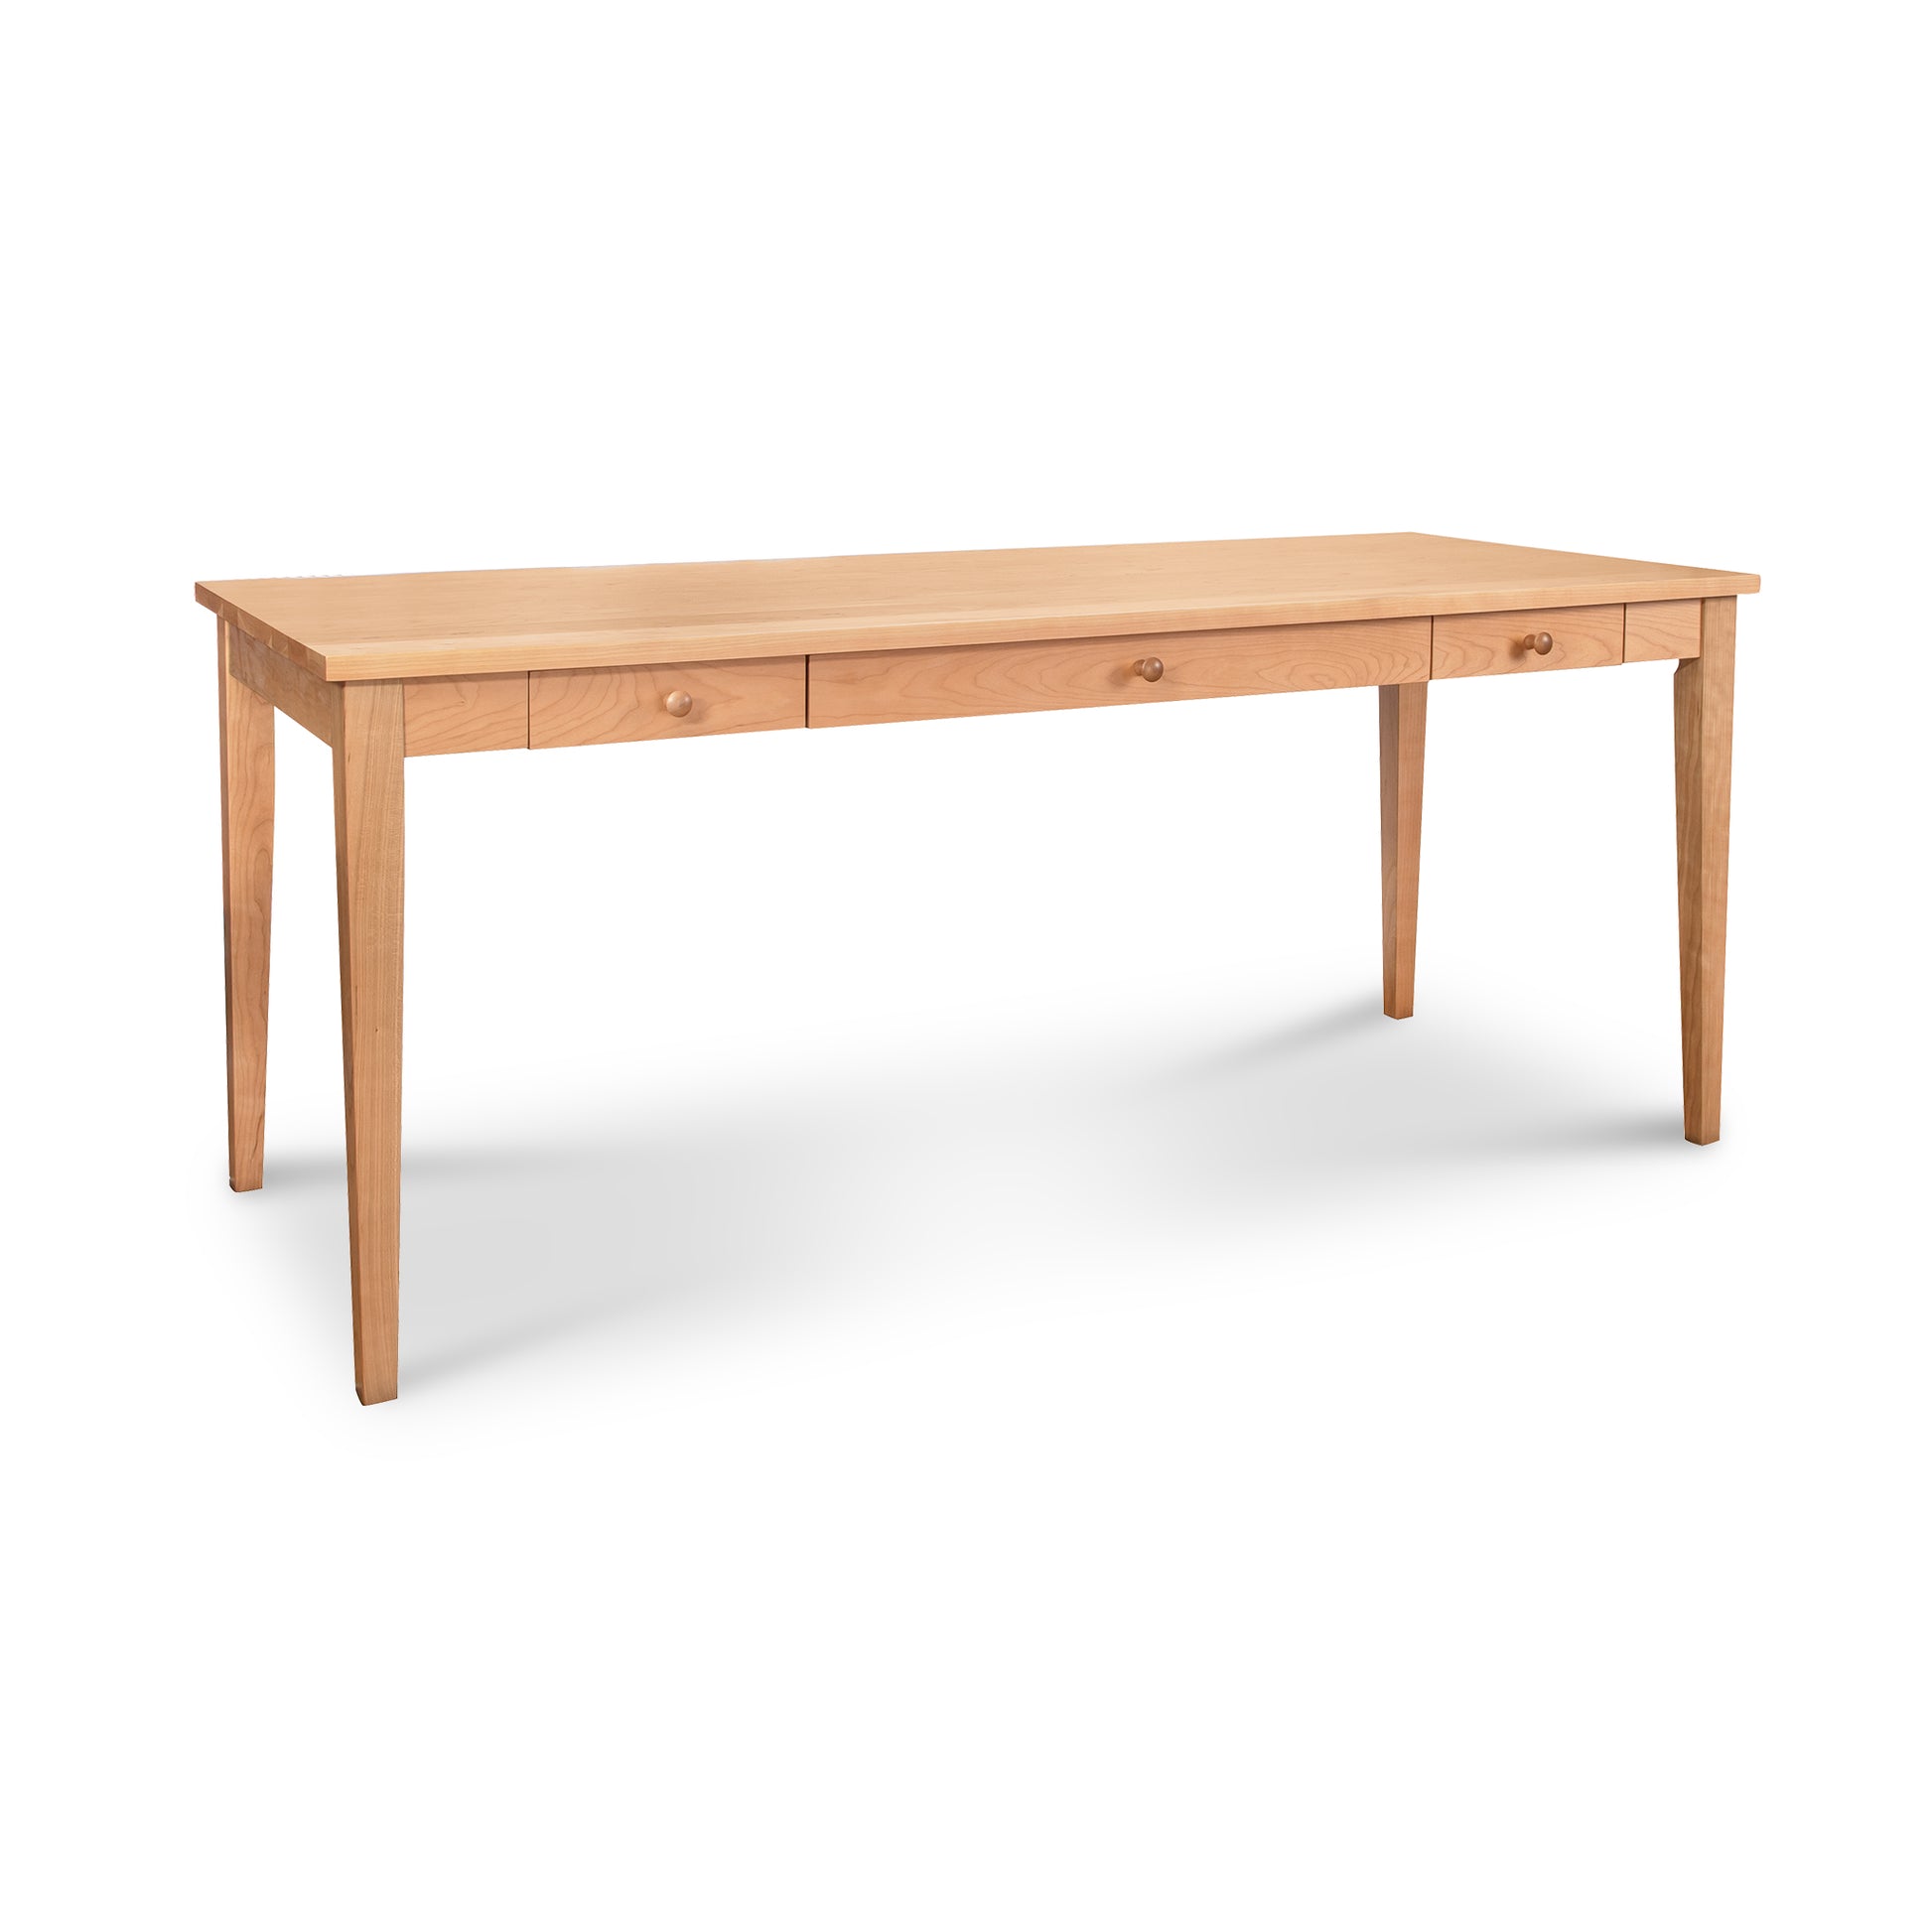 A Classic Shaker Writing Desk made by Lyndon Furniture, an eco-friendly desk made of solid wood with two drawers.